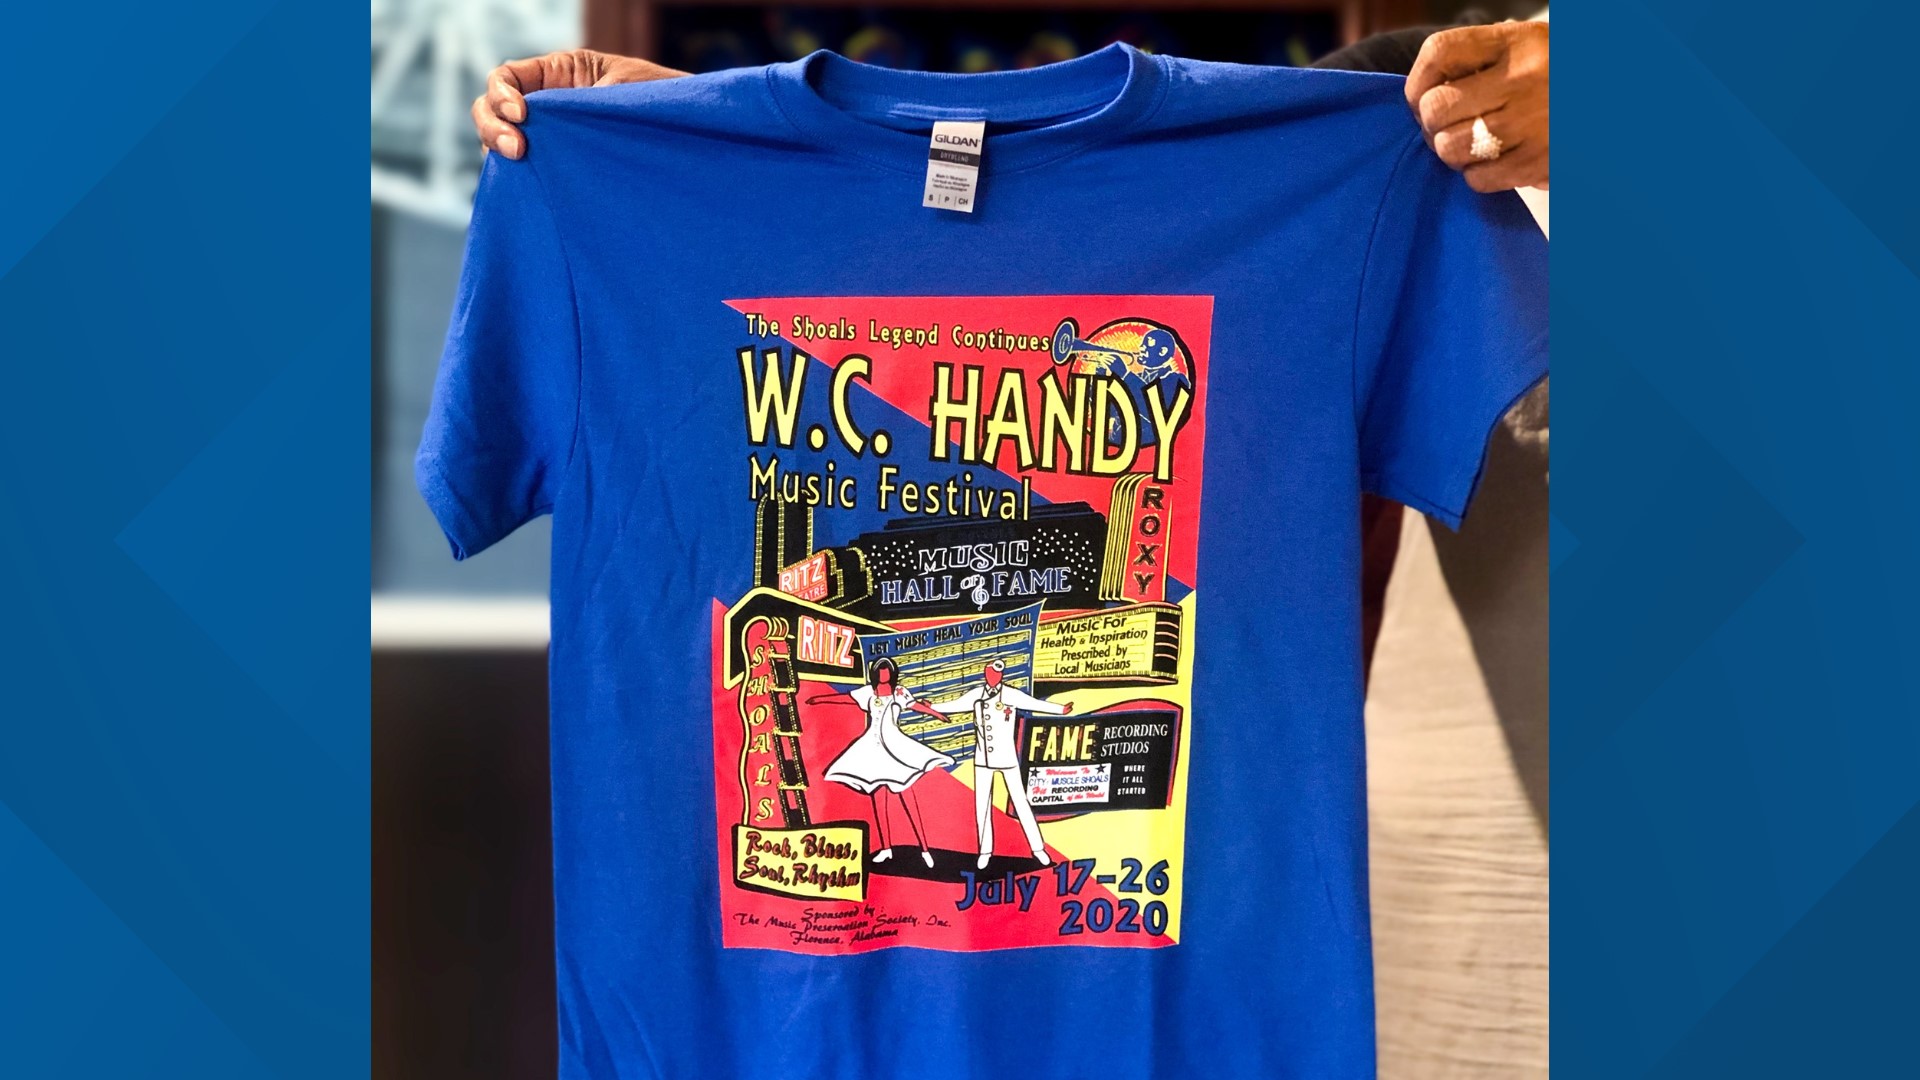 Your art could represent the W.C. Handy Music Festival